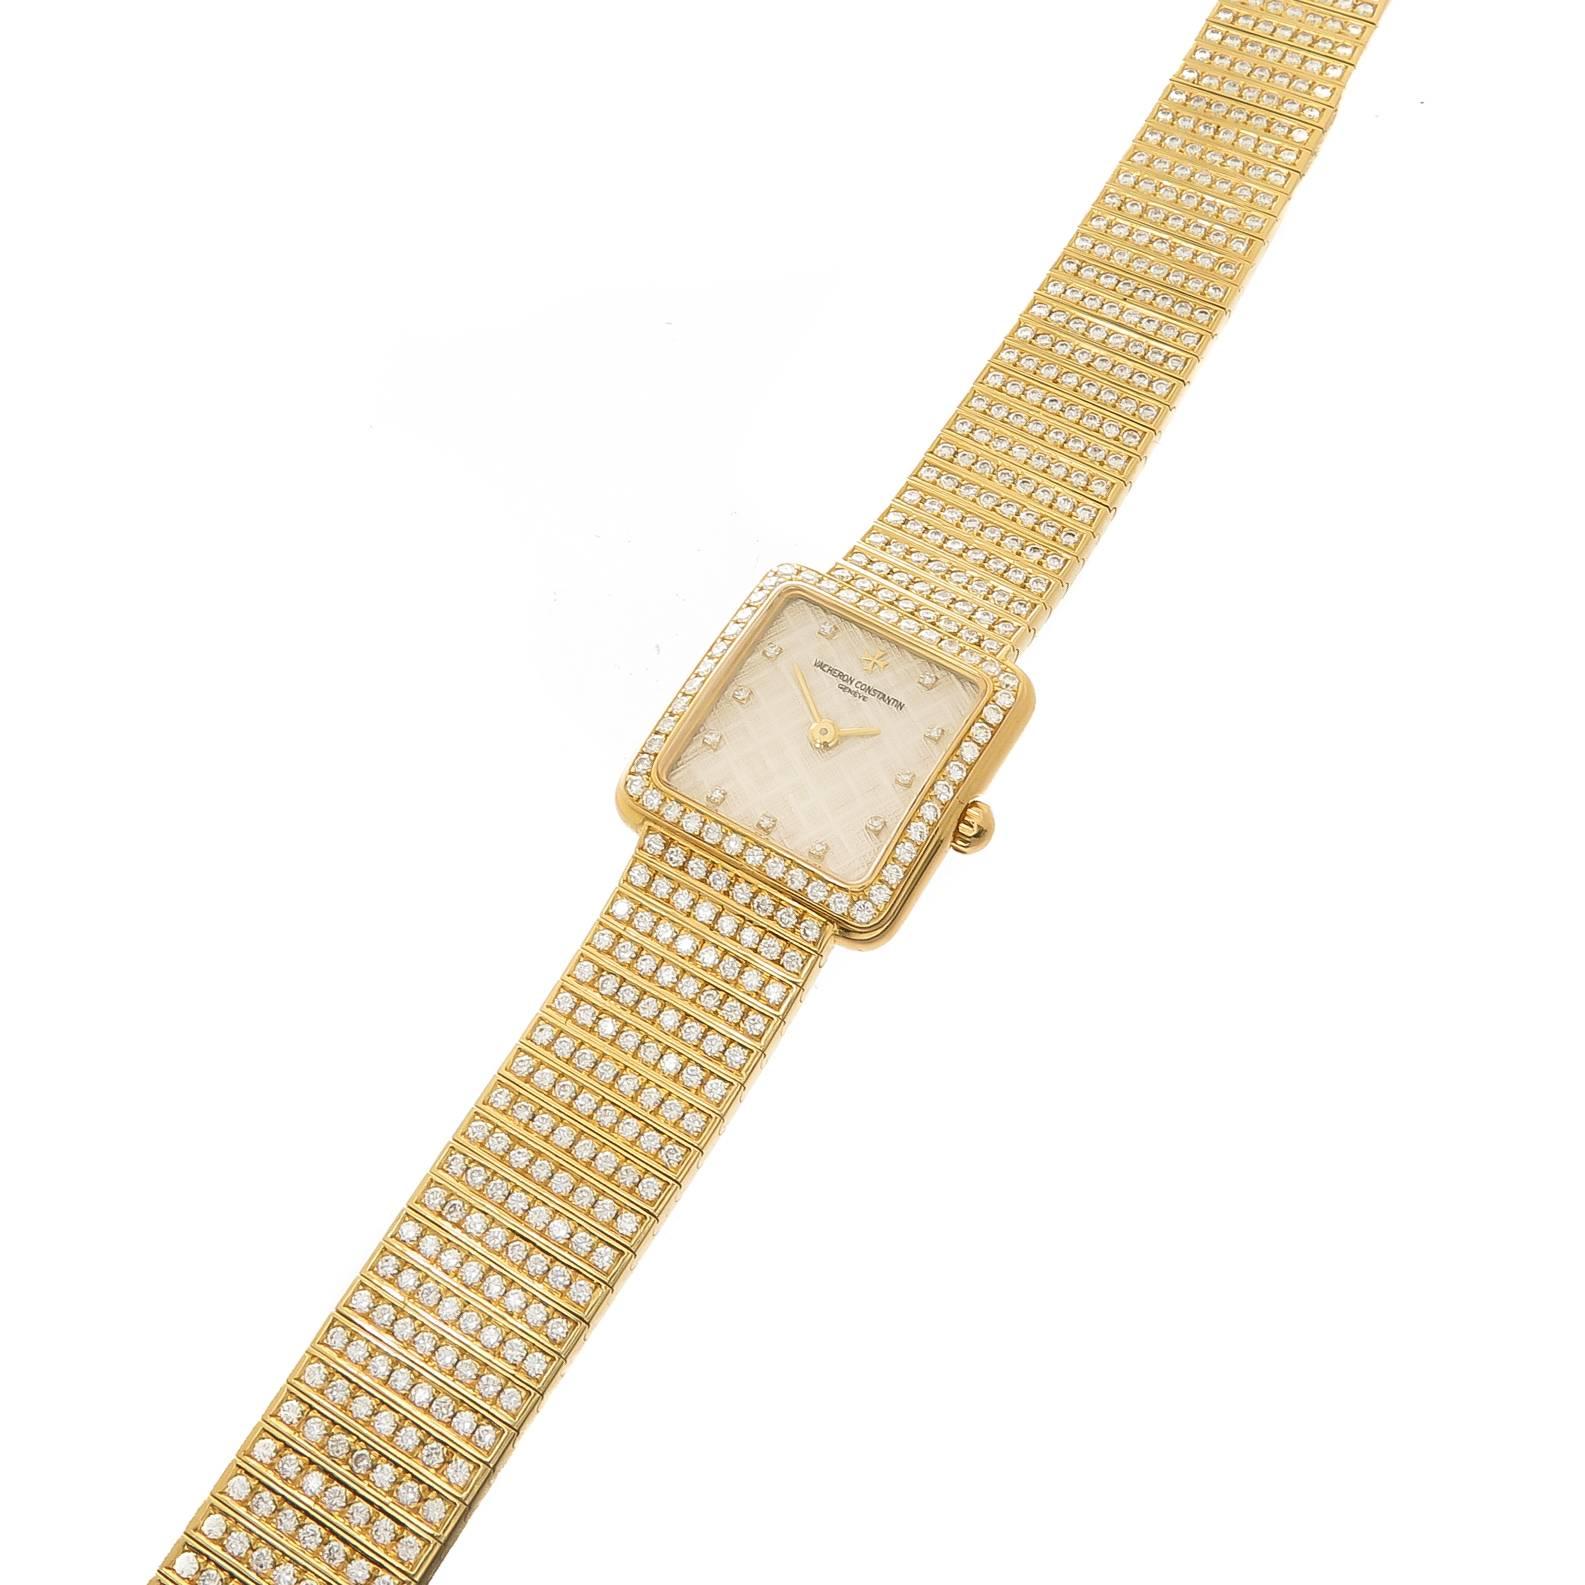 Circa 2000 Vacheron Constantin Ladies 18K Yellow Gold High Jewelry Collection Wrist Watch. Diamond set Bracelet and Bezel of Round Brilliant cuts totaling 5 carats and Grading as VS in Clarity and F-G in color. Caliber 1055 21 Jewel Manual wind